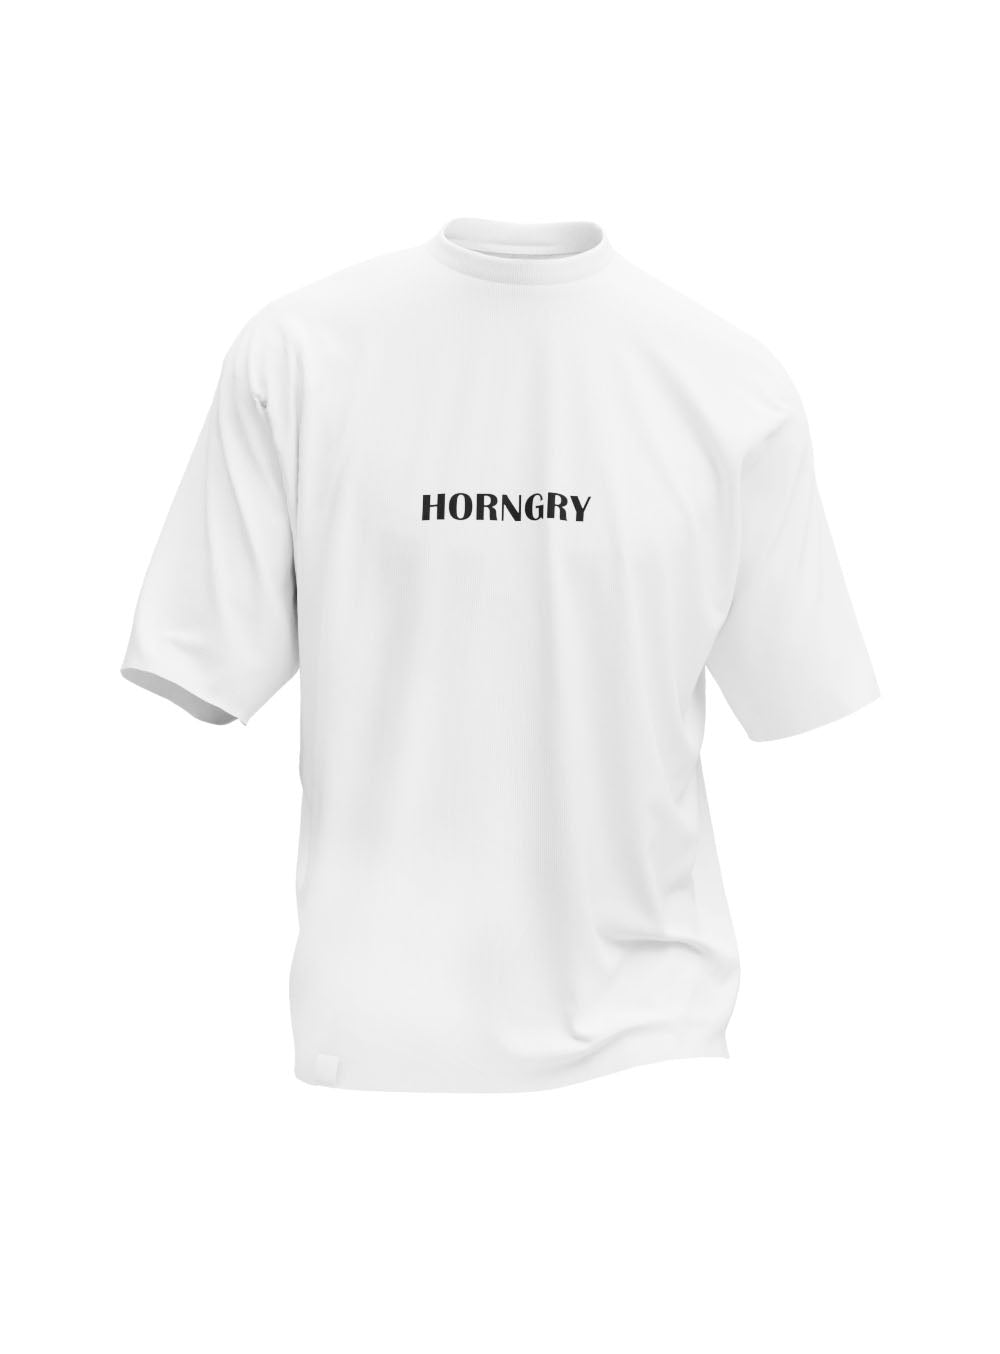 Horngry Oversized White T-Shirt